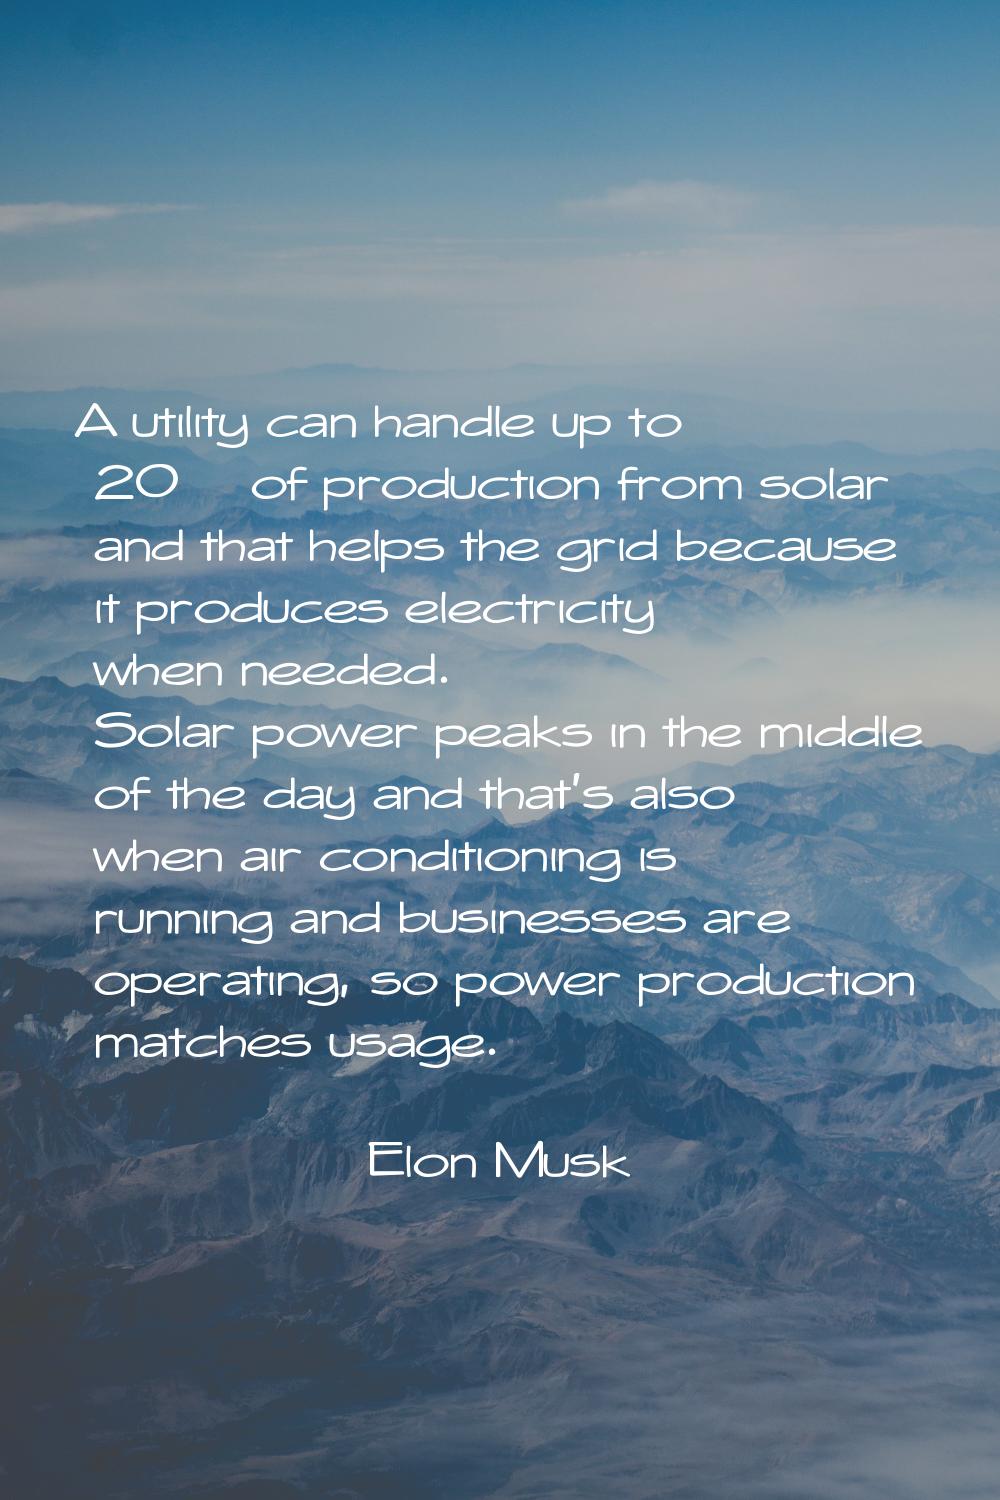 A utility can handle up to 20% of production from solar and that helps the grid because it produces